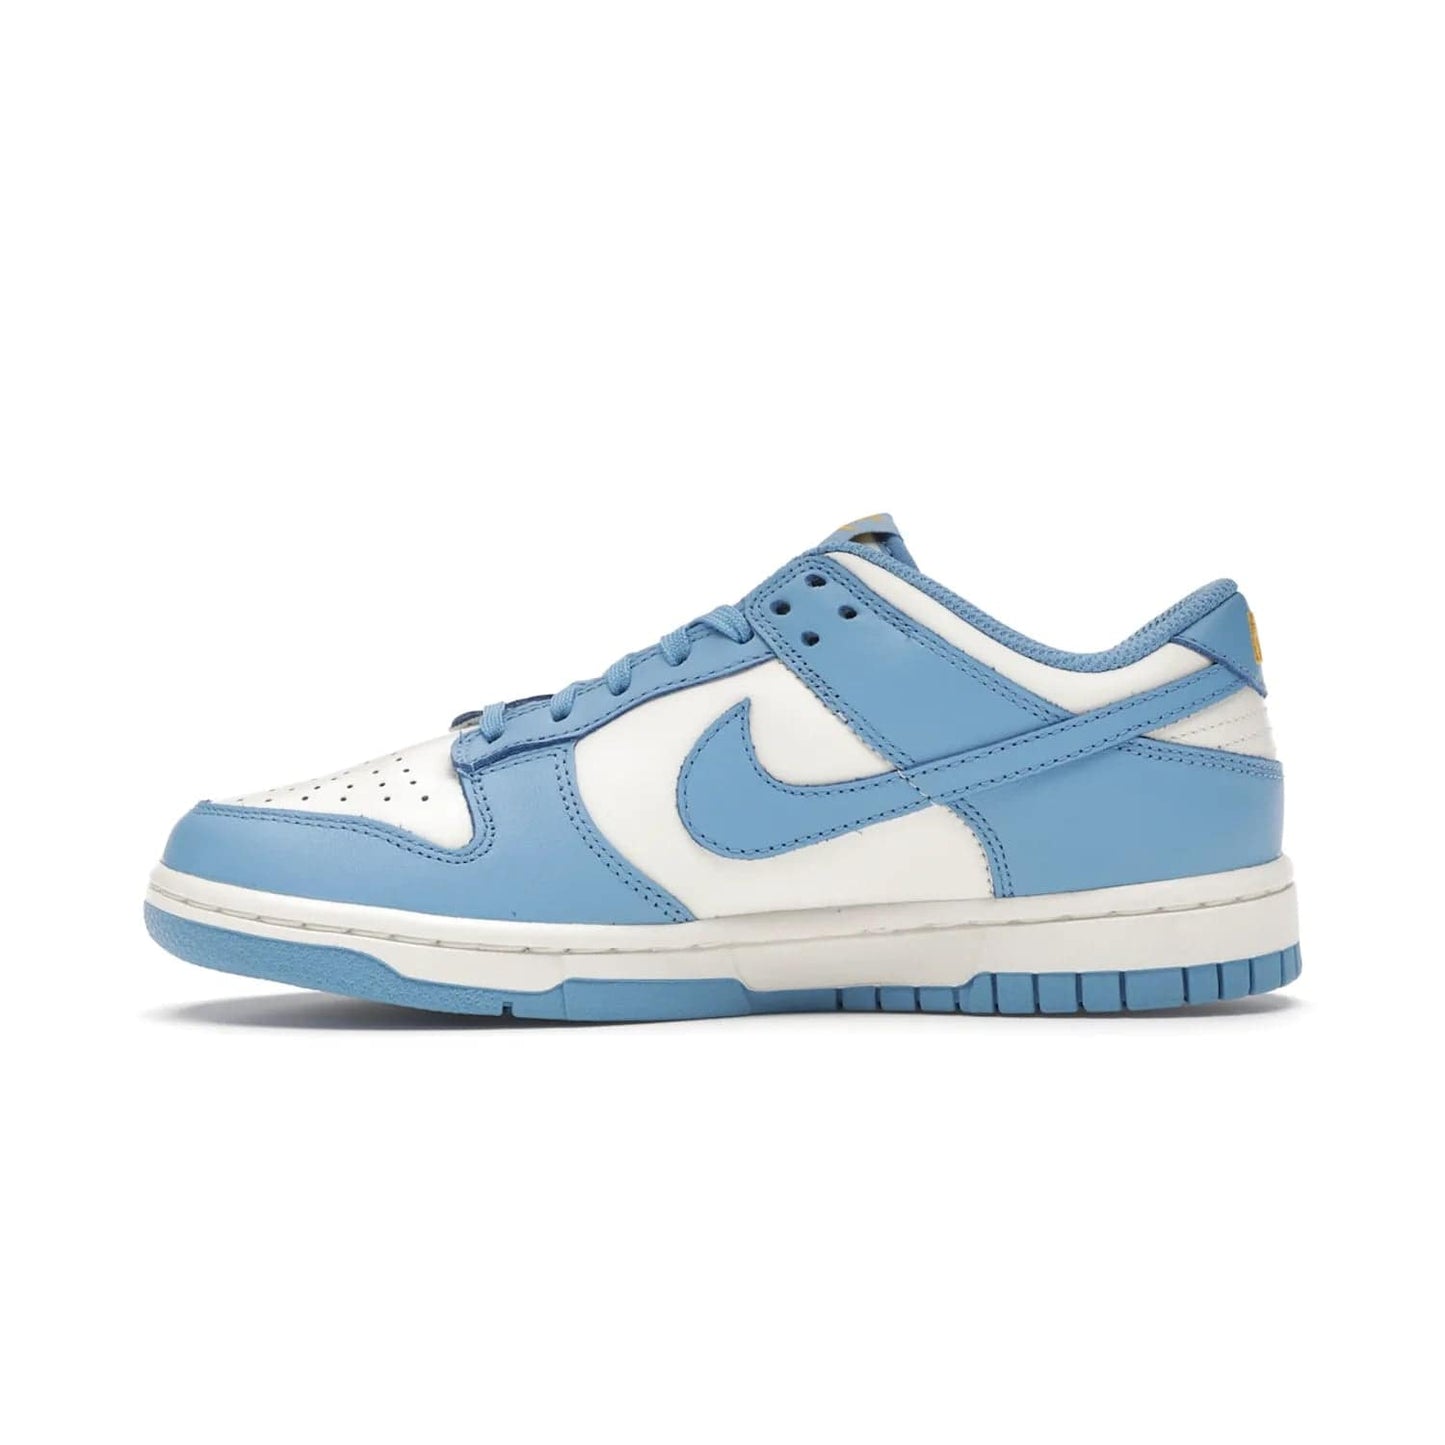 Nike Dunk Low Coast (Women's) - Image 19 - Only at www.BallersClubKickz.com - Iconic UCLA colors honor the west coast with the Nike Dunk Low Coast (Women's), a bold combo of light blue, white and yellow. Light leather upper with white midsole and light EVA outsole offer a modern twist. Released Feb 2021 for $100.